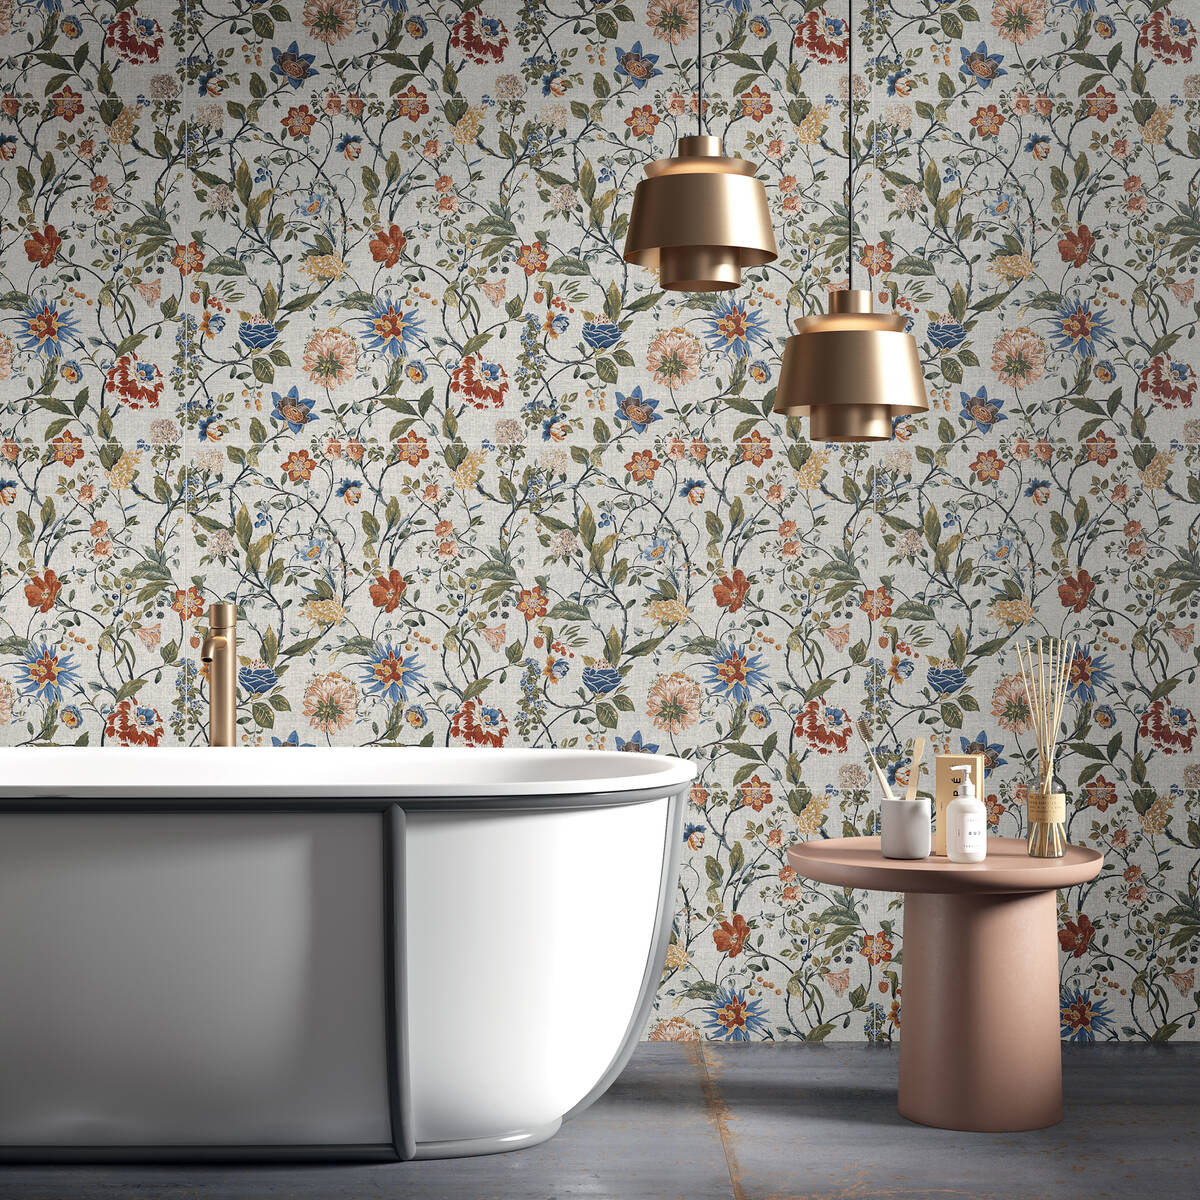 Through its use of color and varied graphic motifs, Gardenia Orchidea's Gioia revisits the wall ...